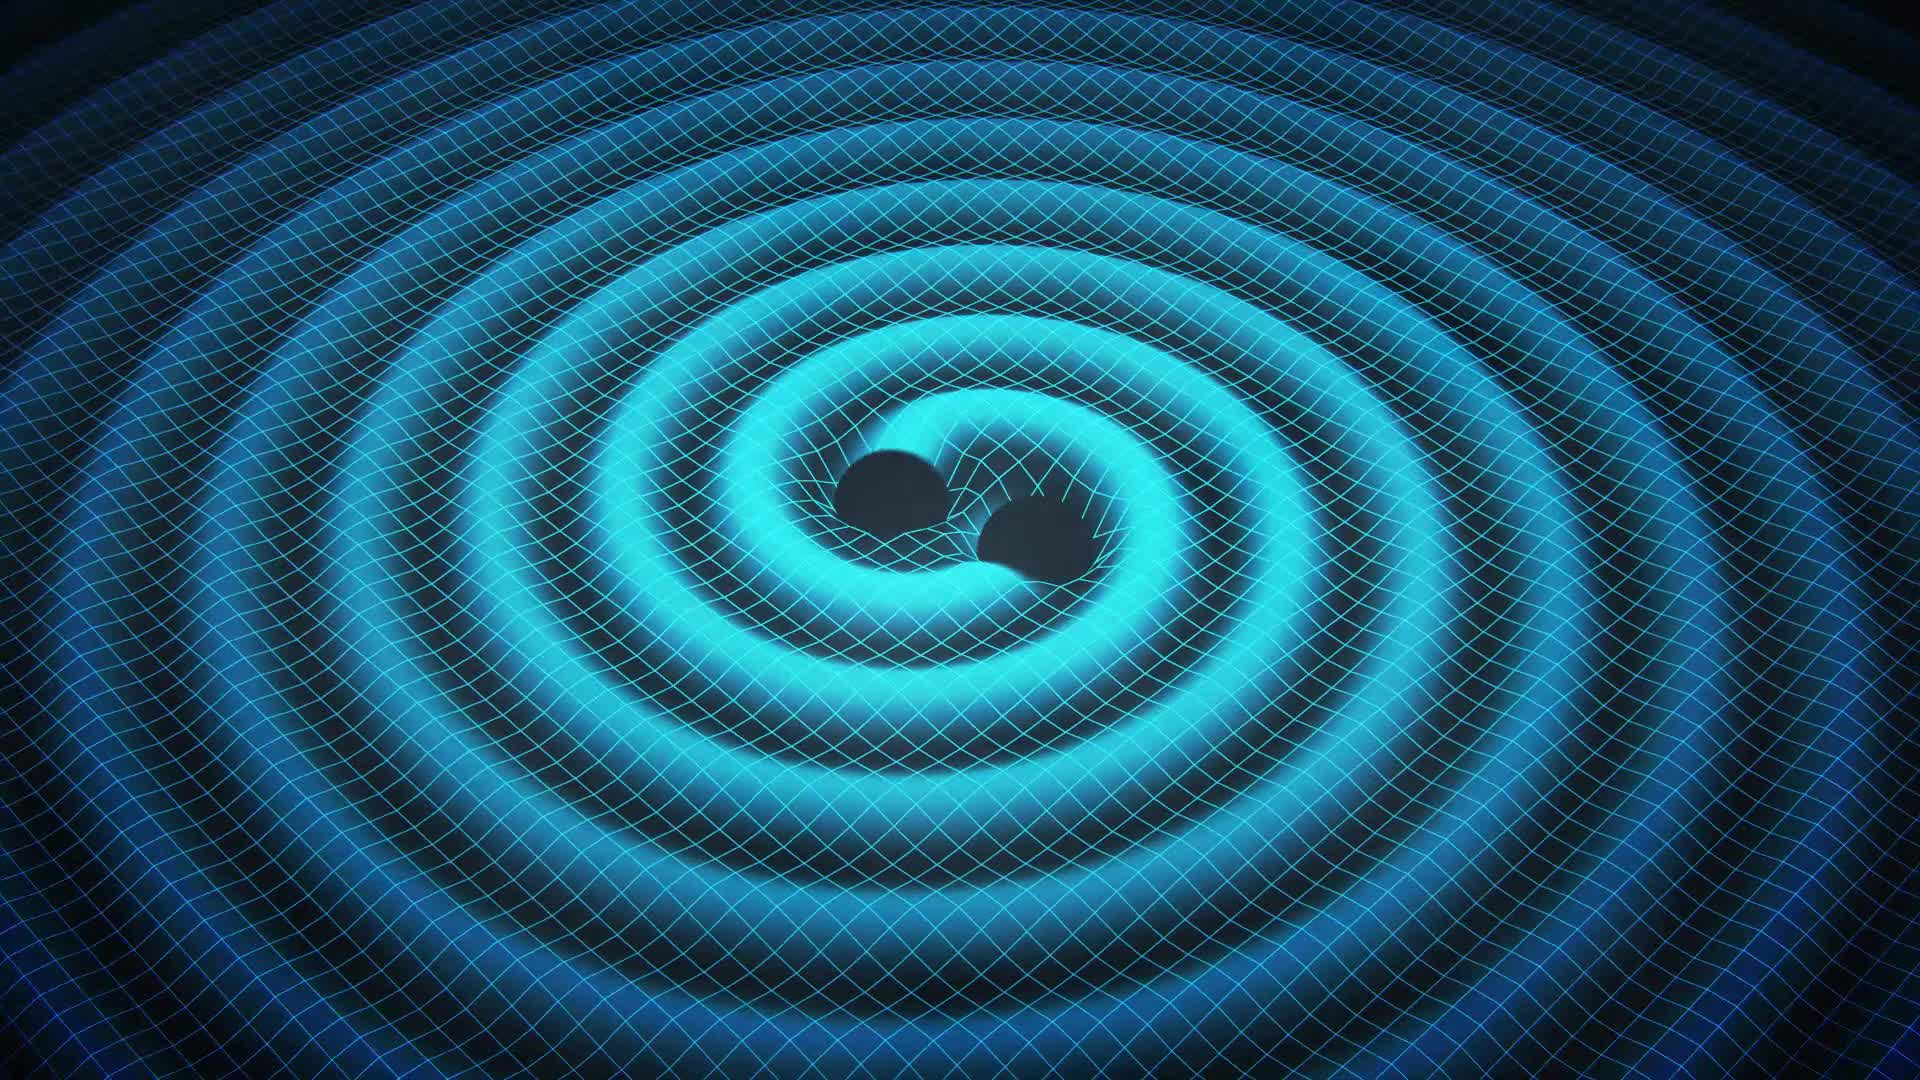 7 MIND-BLOWING Things The Discovery of GRAVITATIONAL WAVES, Proves!